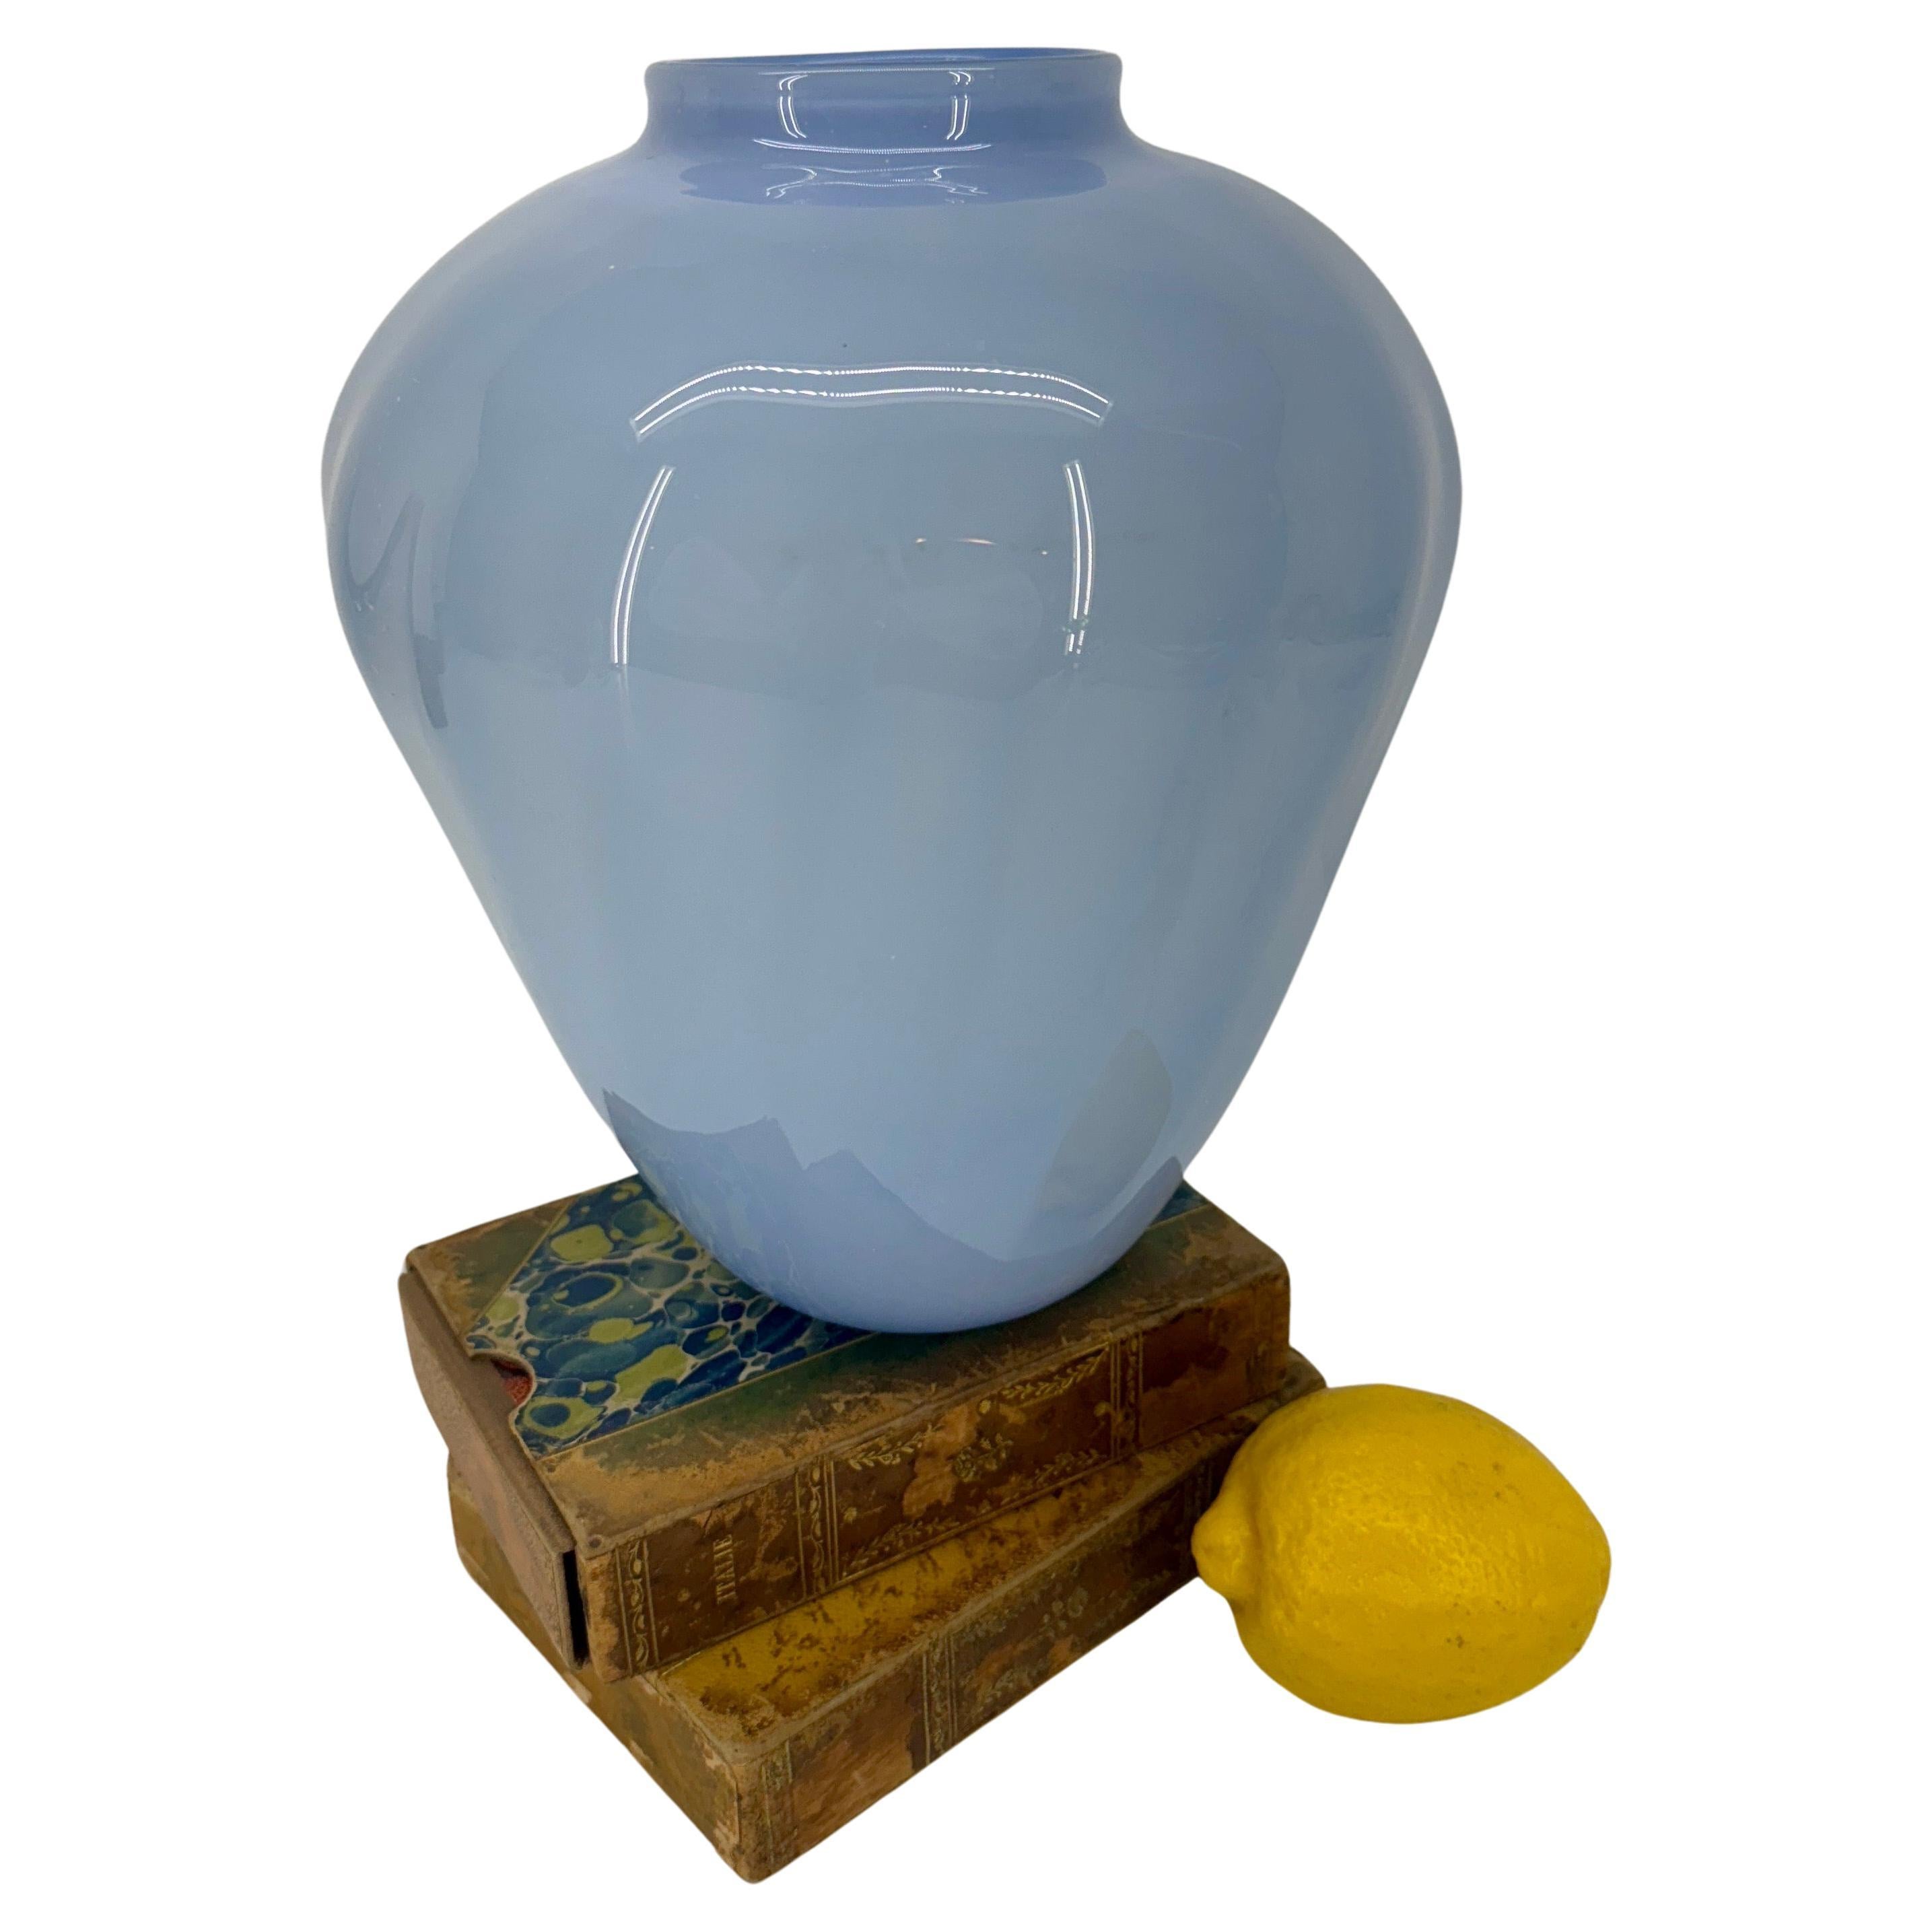 Handcrafted Studio Art Glass Vase, 1980’s New York City

A hand-crafted vessel in an opalescent, almost pearlized lighter shade of blue. This lightweight vase would be a wonderful addition to an existing collection on a bookcase in a home office or